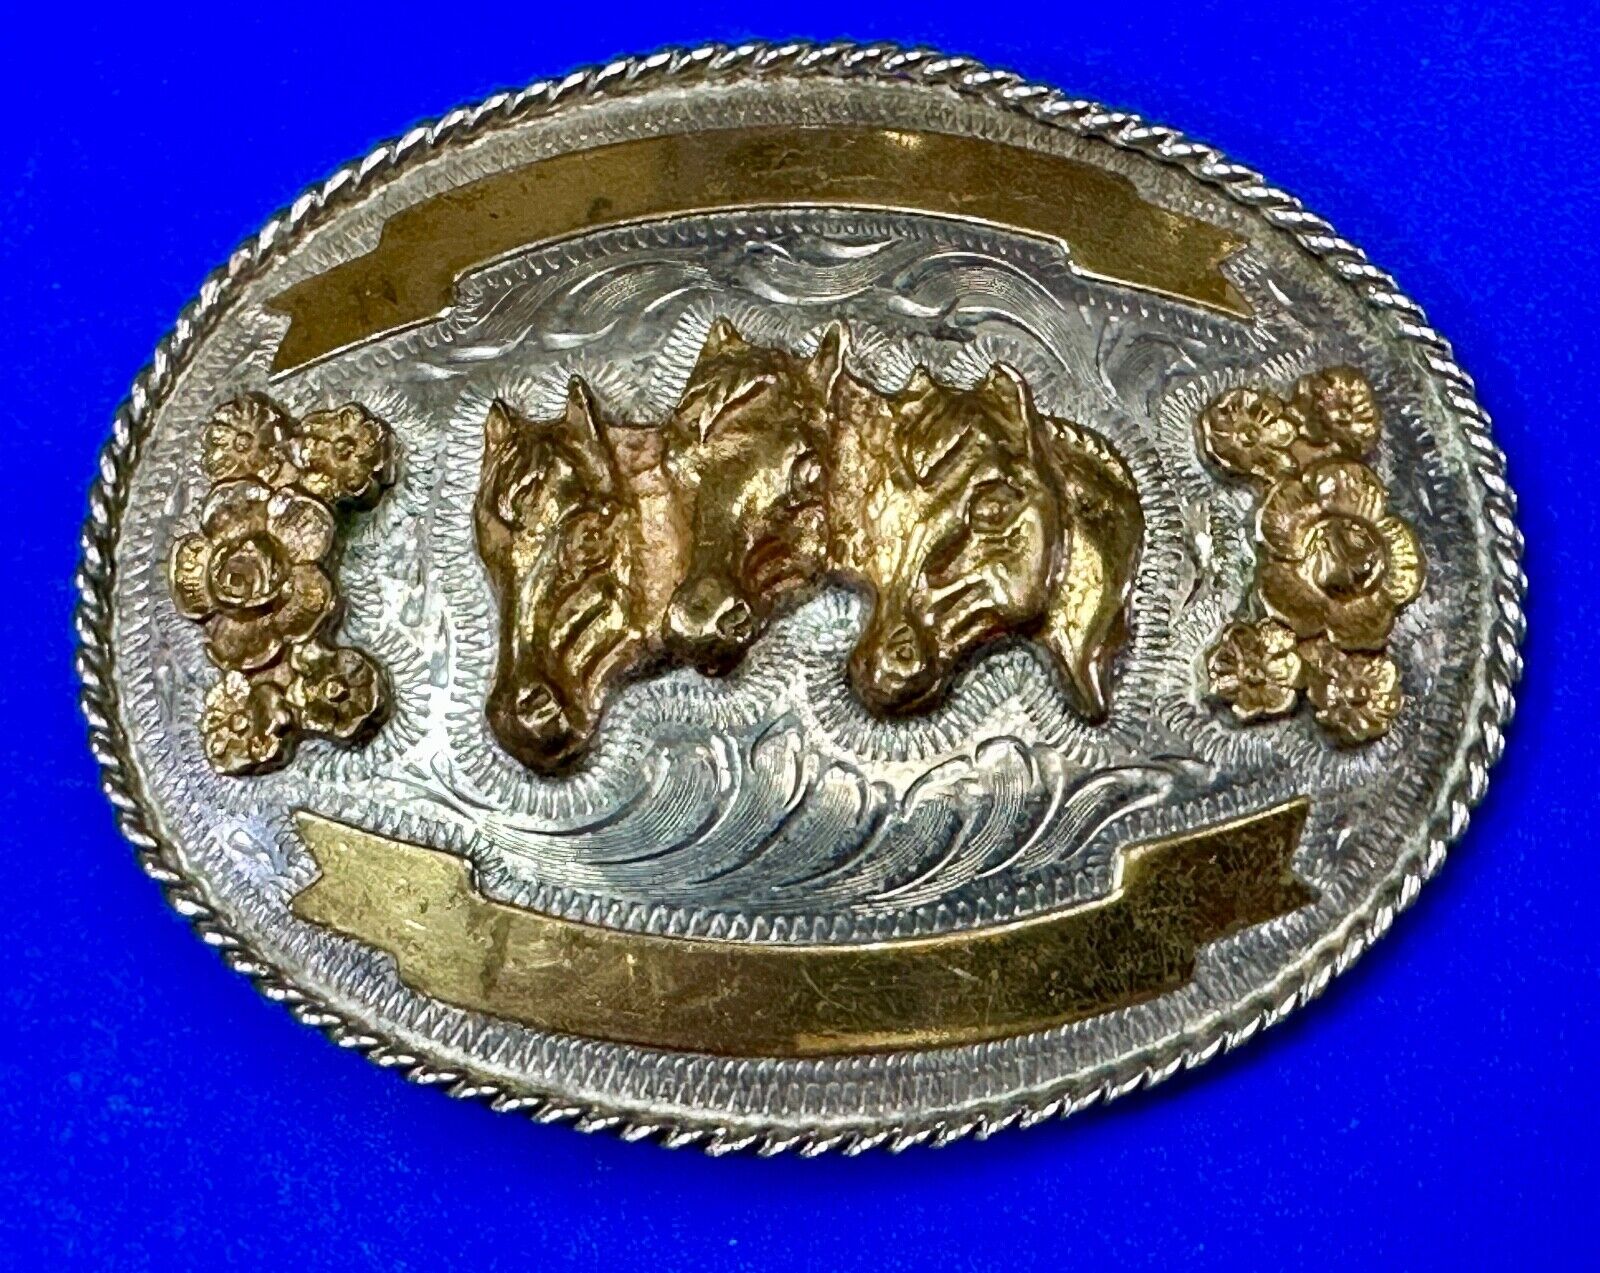 Three horse heads - Trophy Award Ribbon to engrave belt buckle - see makers mark